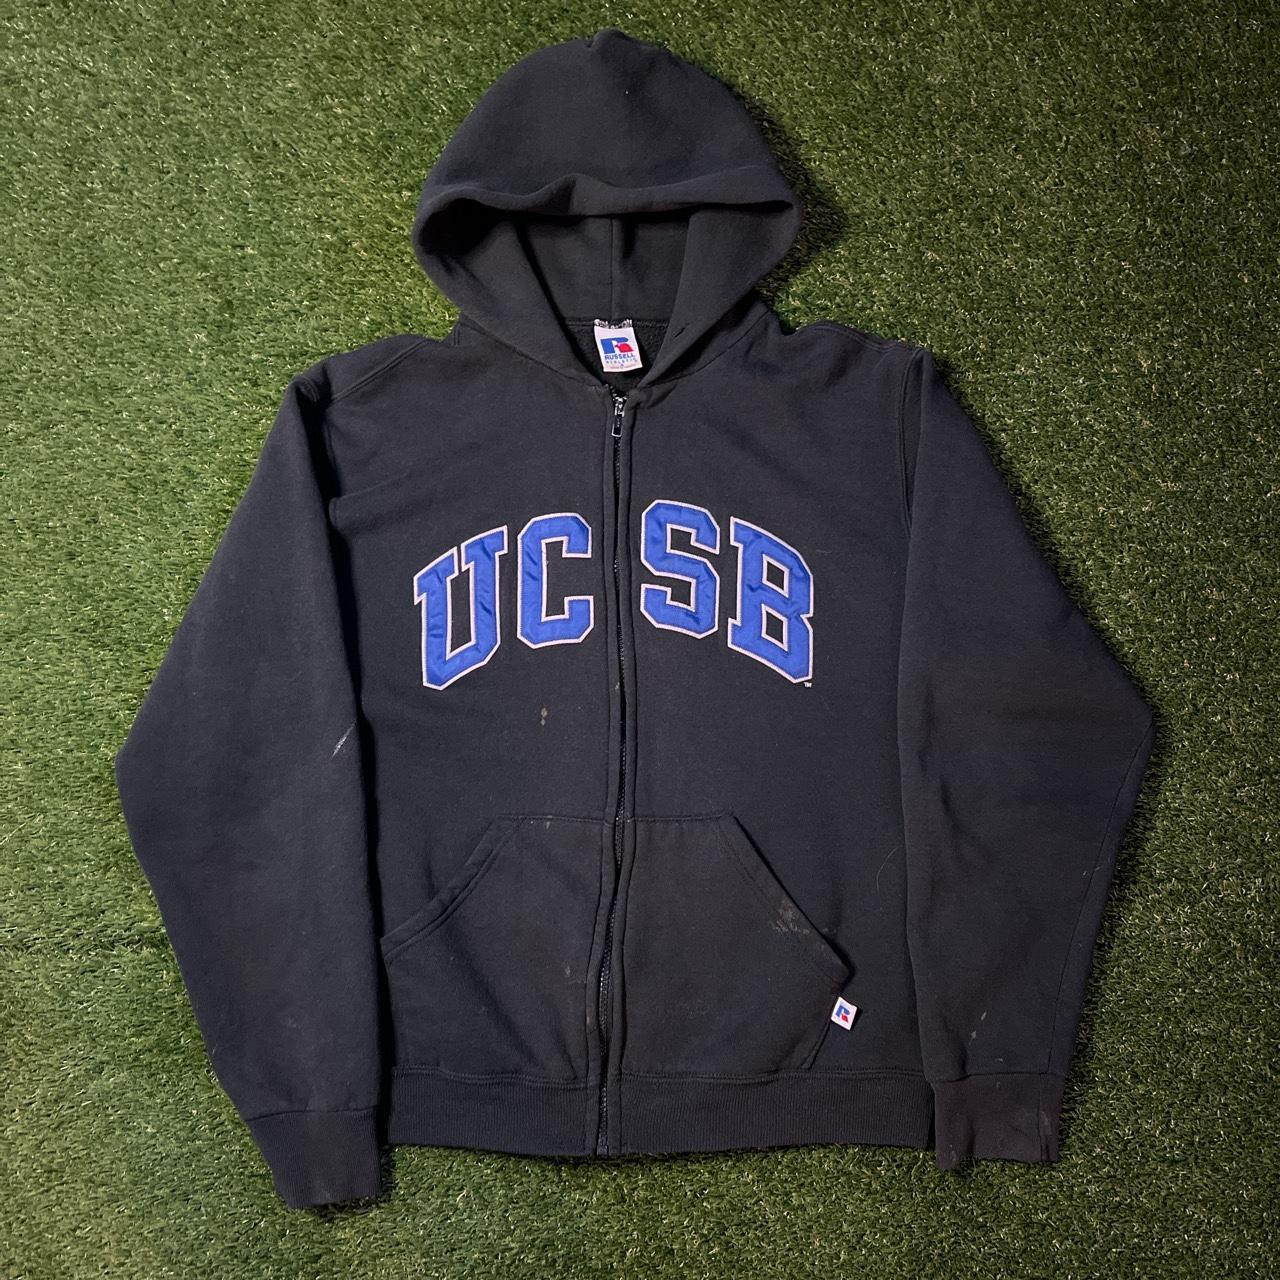 UCSB RUSSELL vintage zip up hoodie size S. This... - Depop